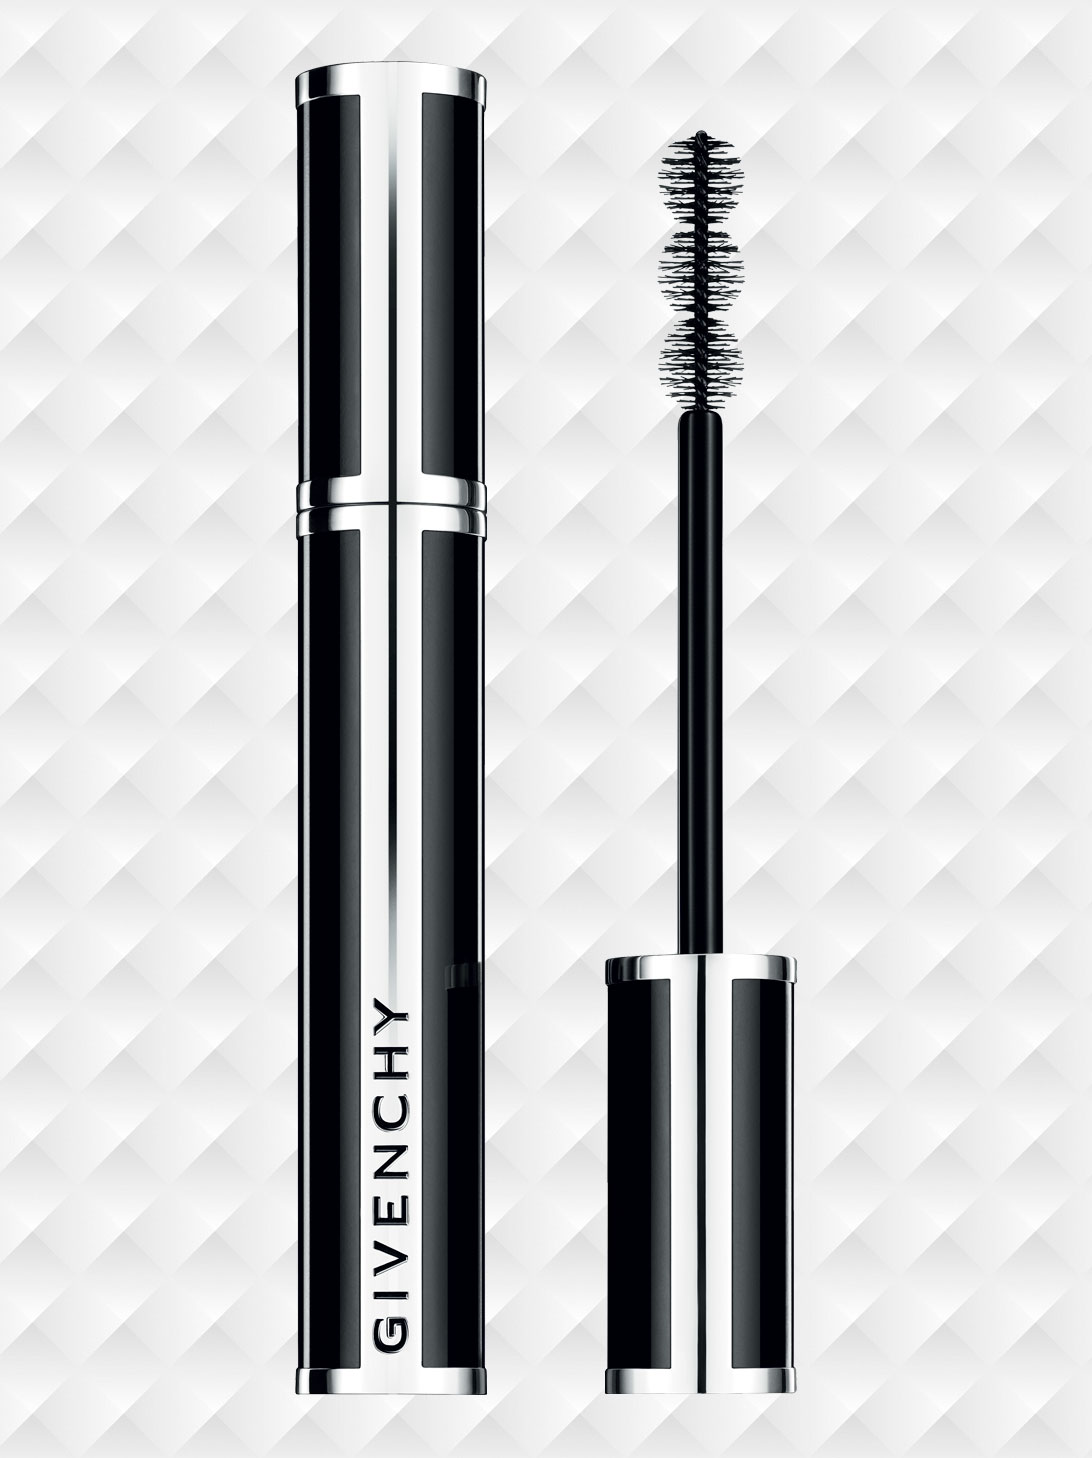 NOIR COUTURE • 4 in 1 MascaraVolume, Length, Curl \u0026 Care ∷ GIVENCHY